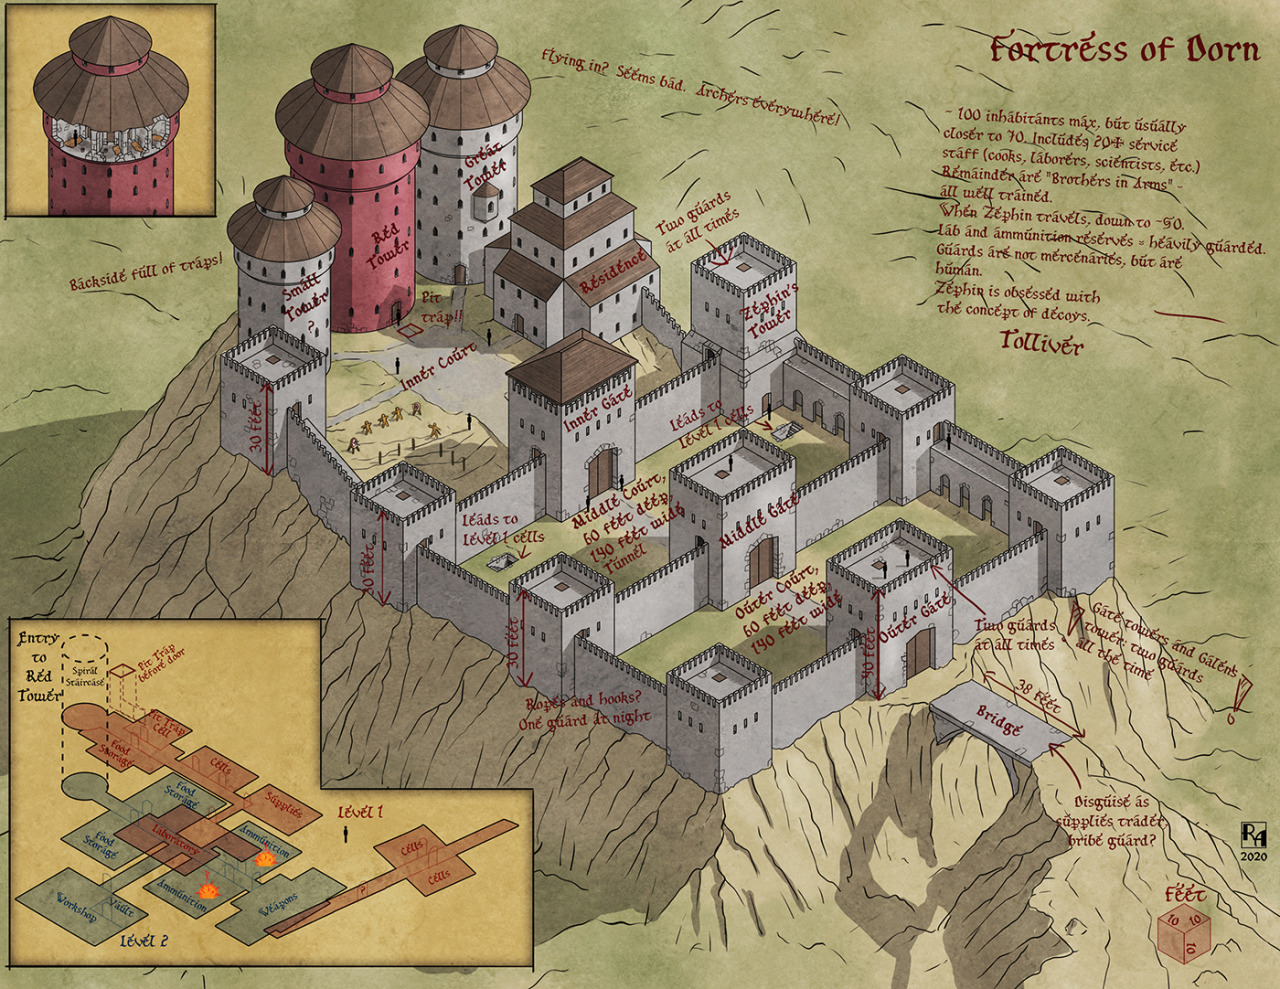 fantasymapmaster: “ Fortress of Dorn - A commissioned map, showing a fortress drawn by a former prisoner. ”